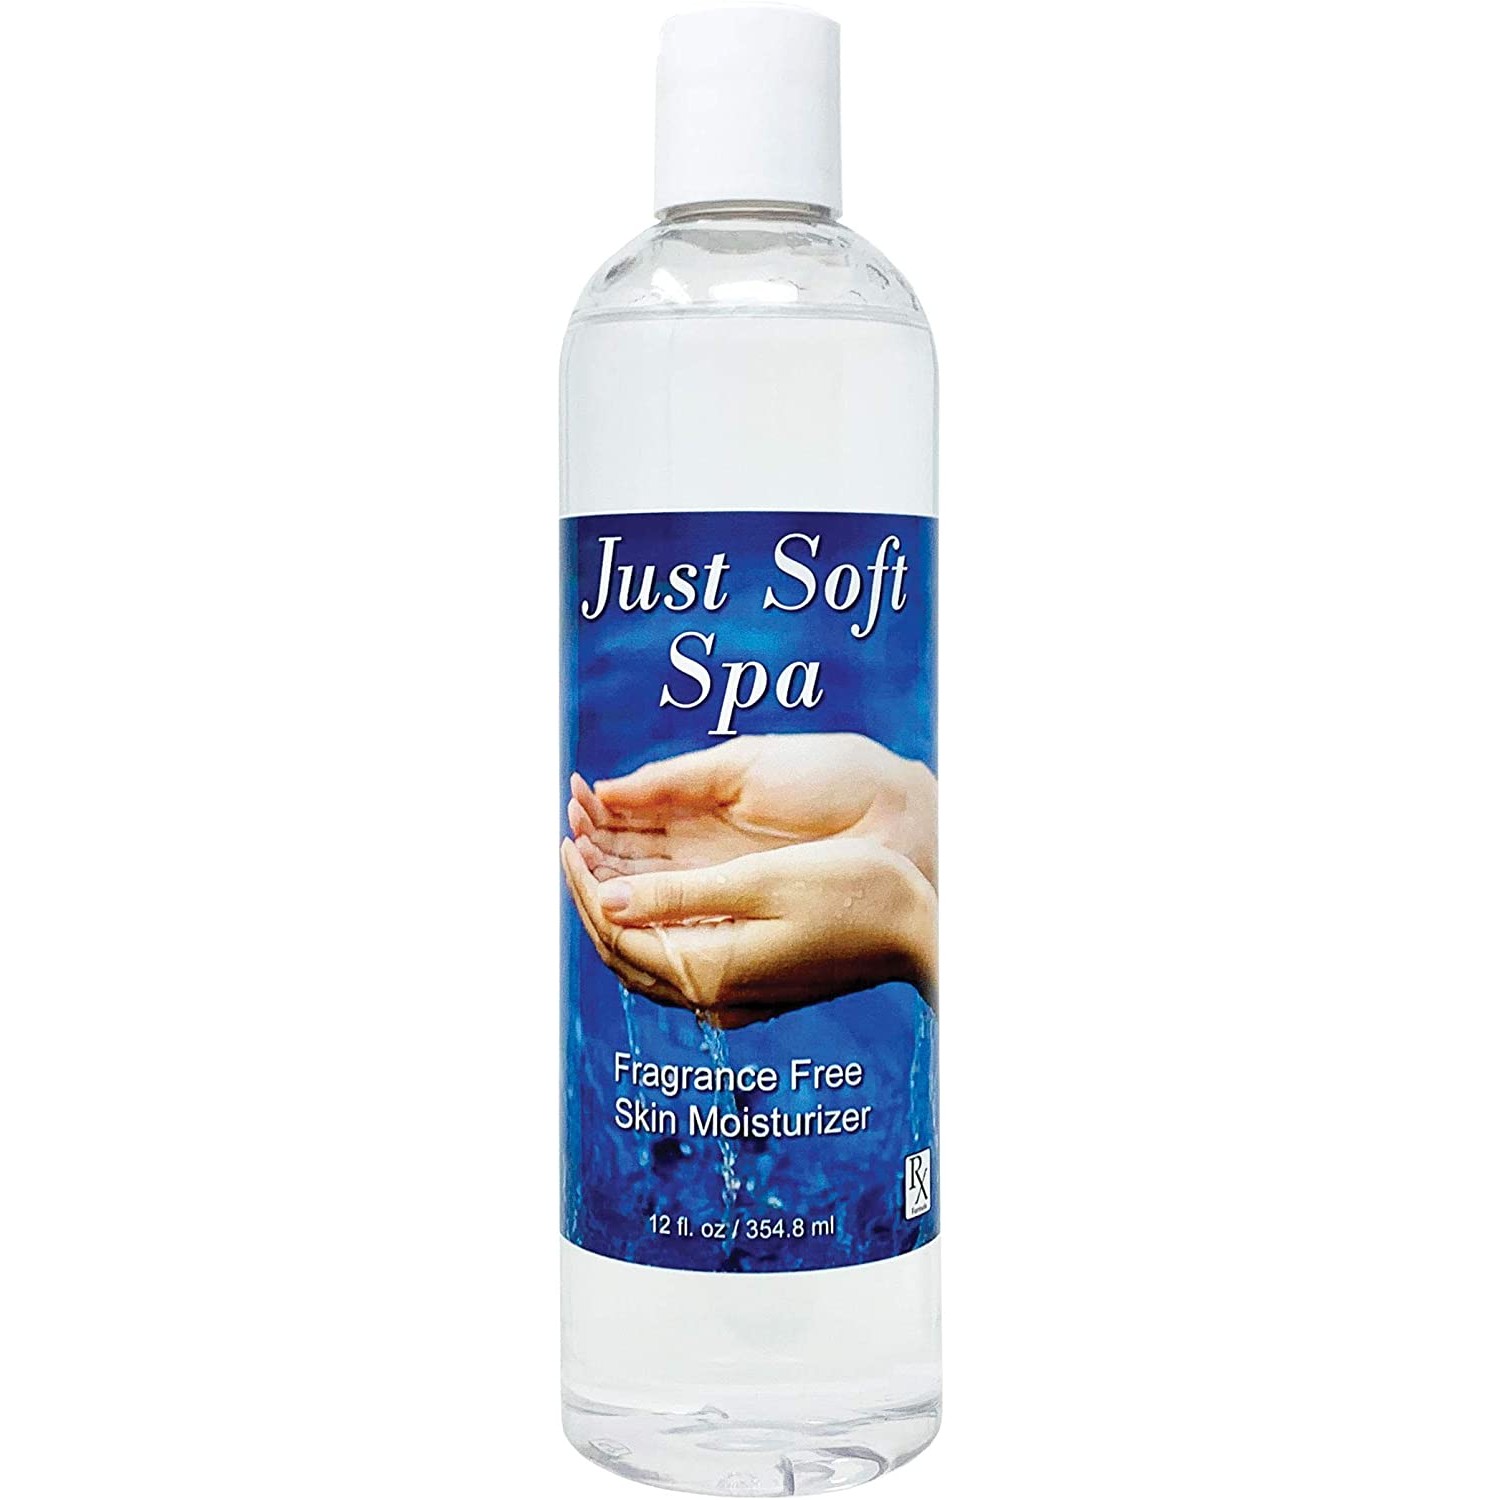 Just Soft Spa - Fragrance Free